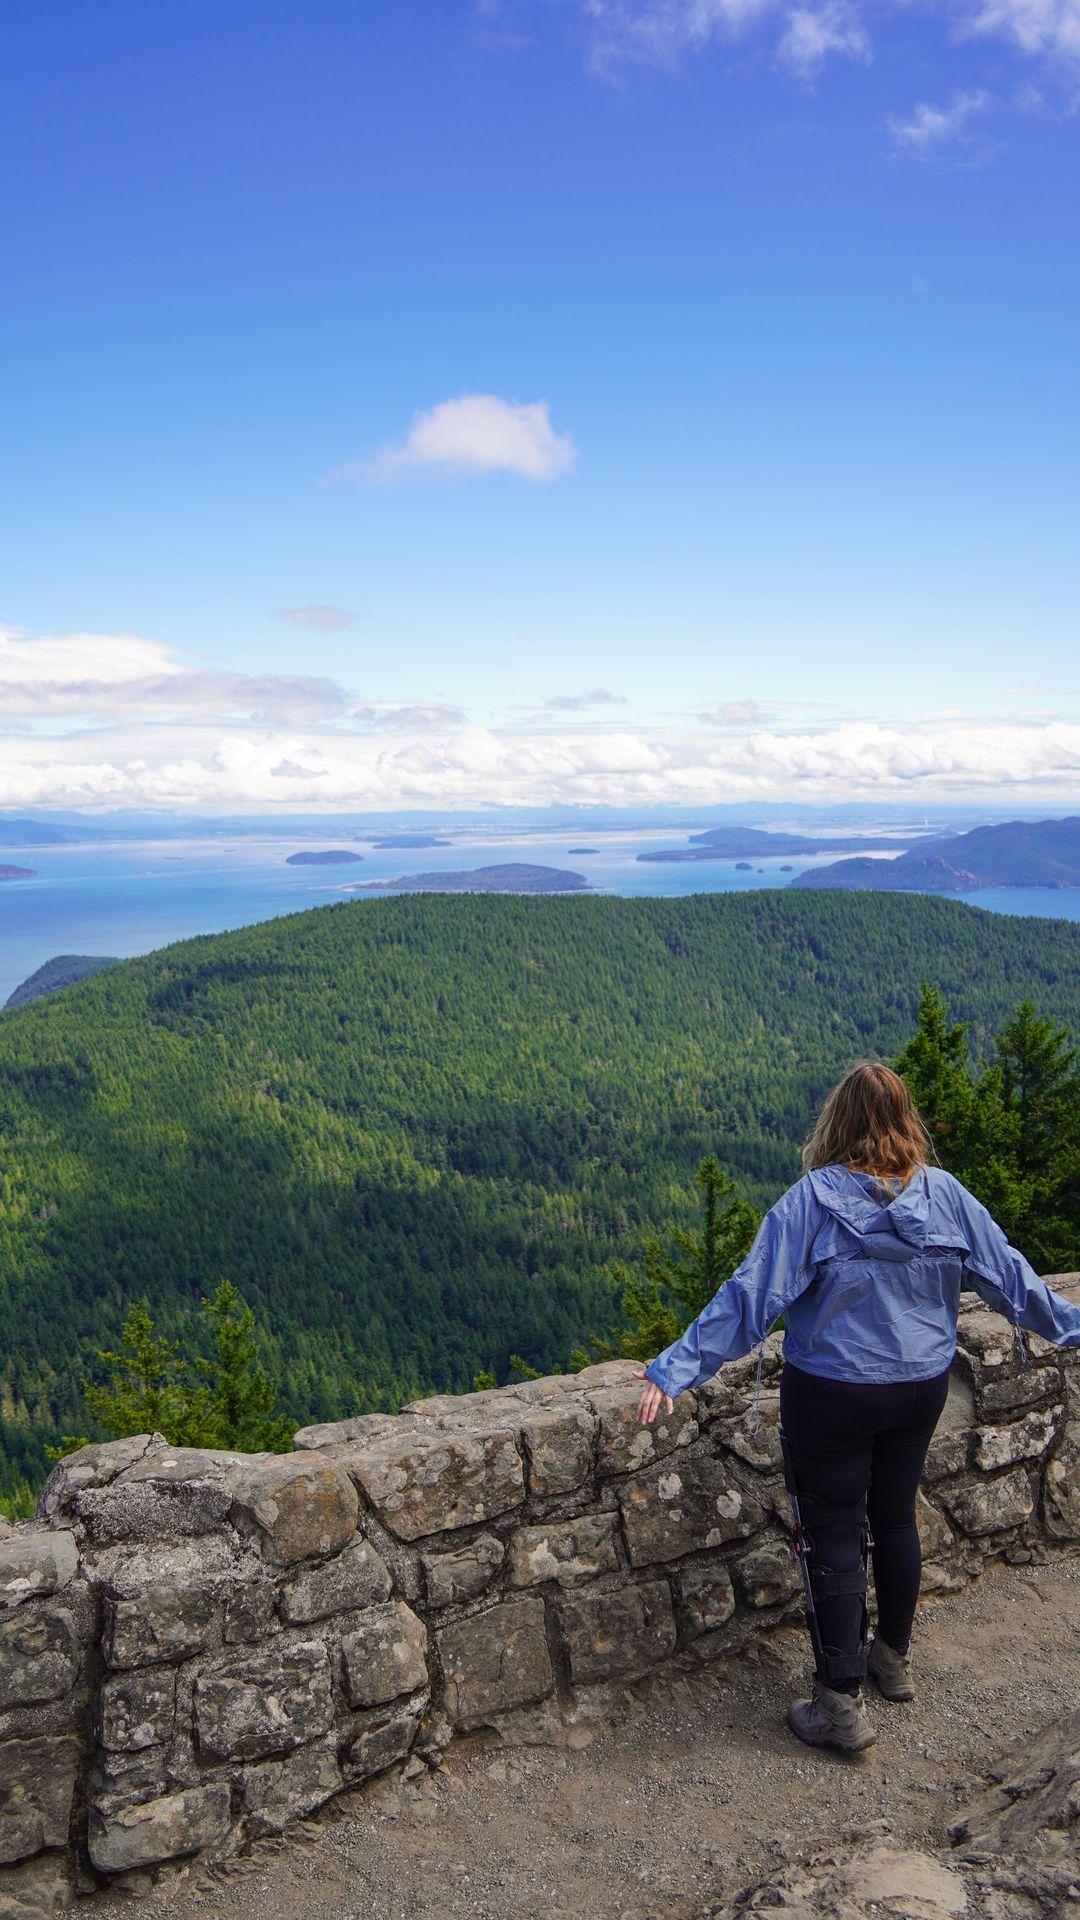 Have you heard of Orcas Island? This gorgeous island is one of the most popular of the San Juan Islands, an archipelago in Northwest Washington. Orcas has the perfect mix of outdoor adventure, shops, wineries and more - there really is something for everyone! 